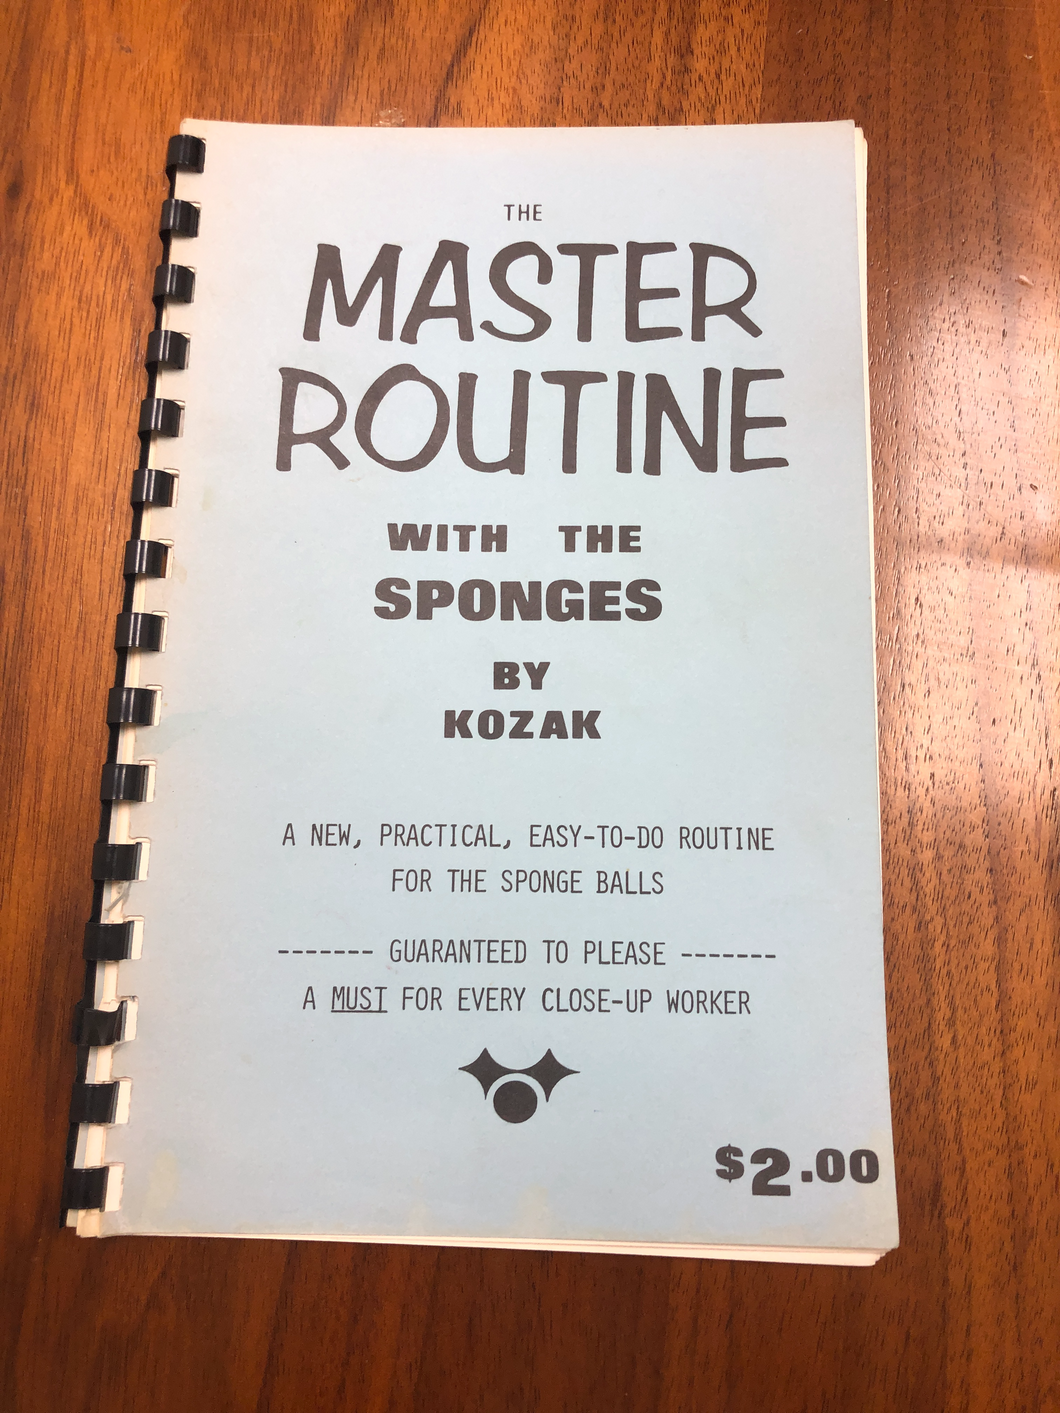 The Master Routine With The Sponges by Kozak